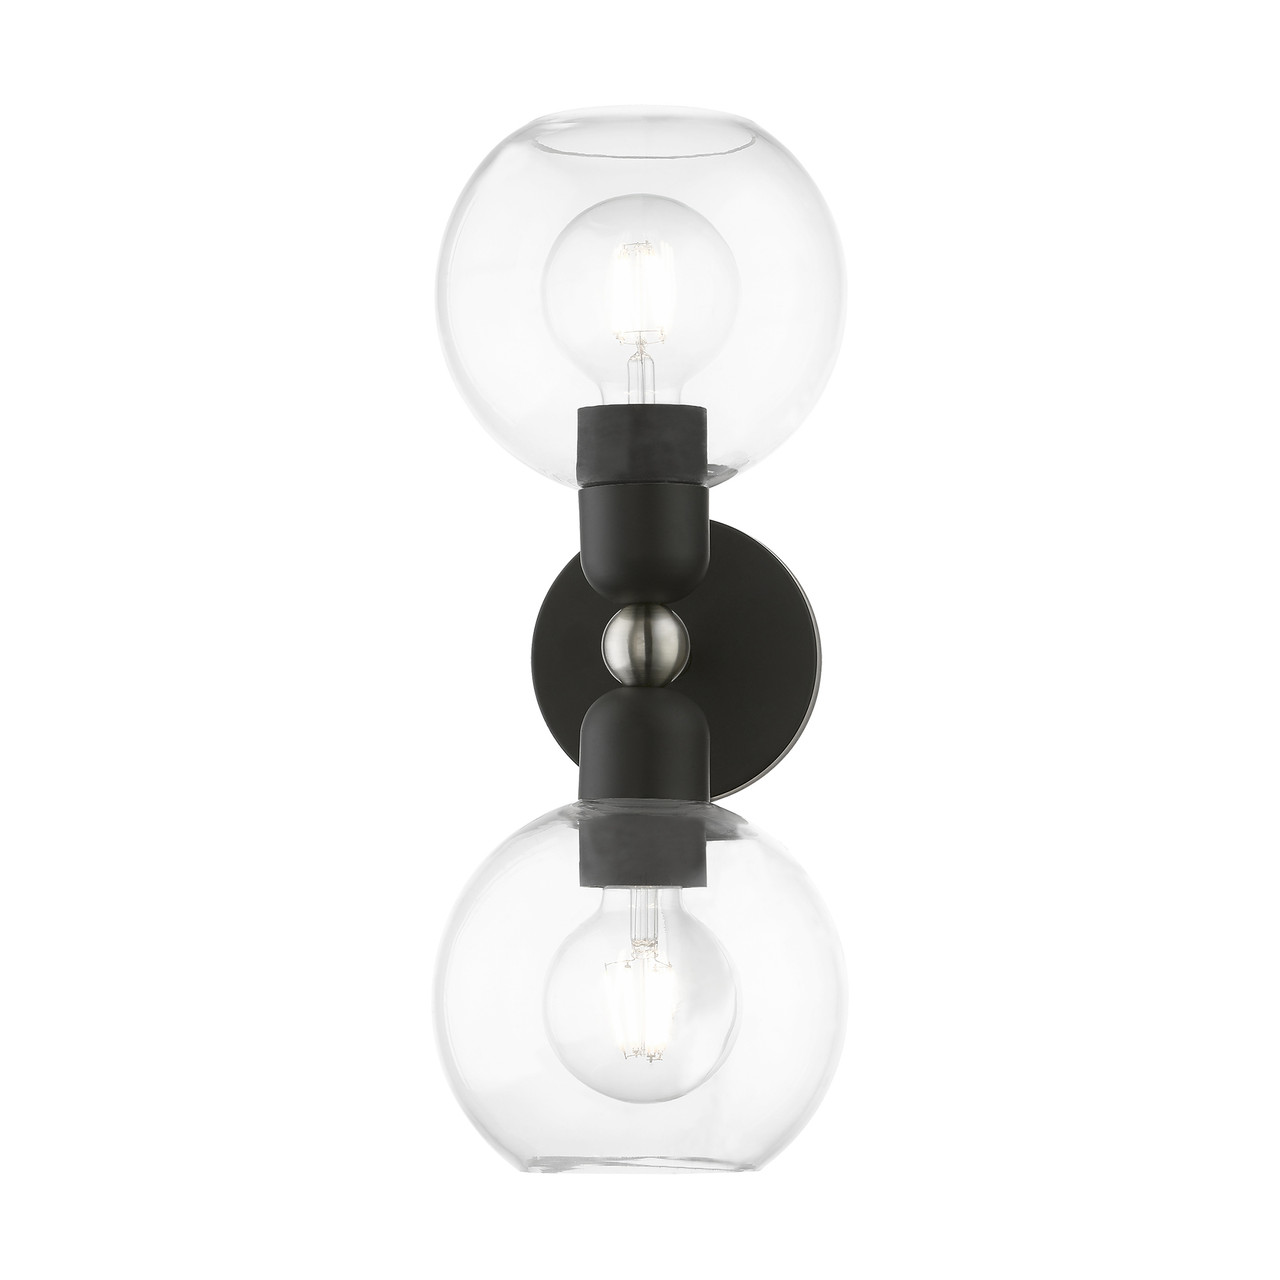 LIVEX LIGHTING 16972-04 2 Light Black with Brushed Nickel Accents Sphere Vanity Sconce